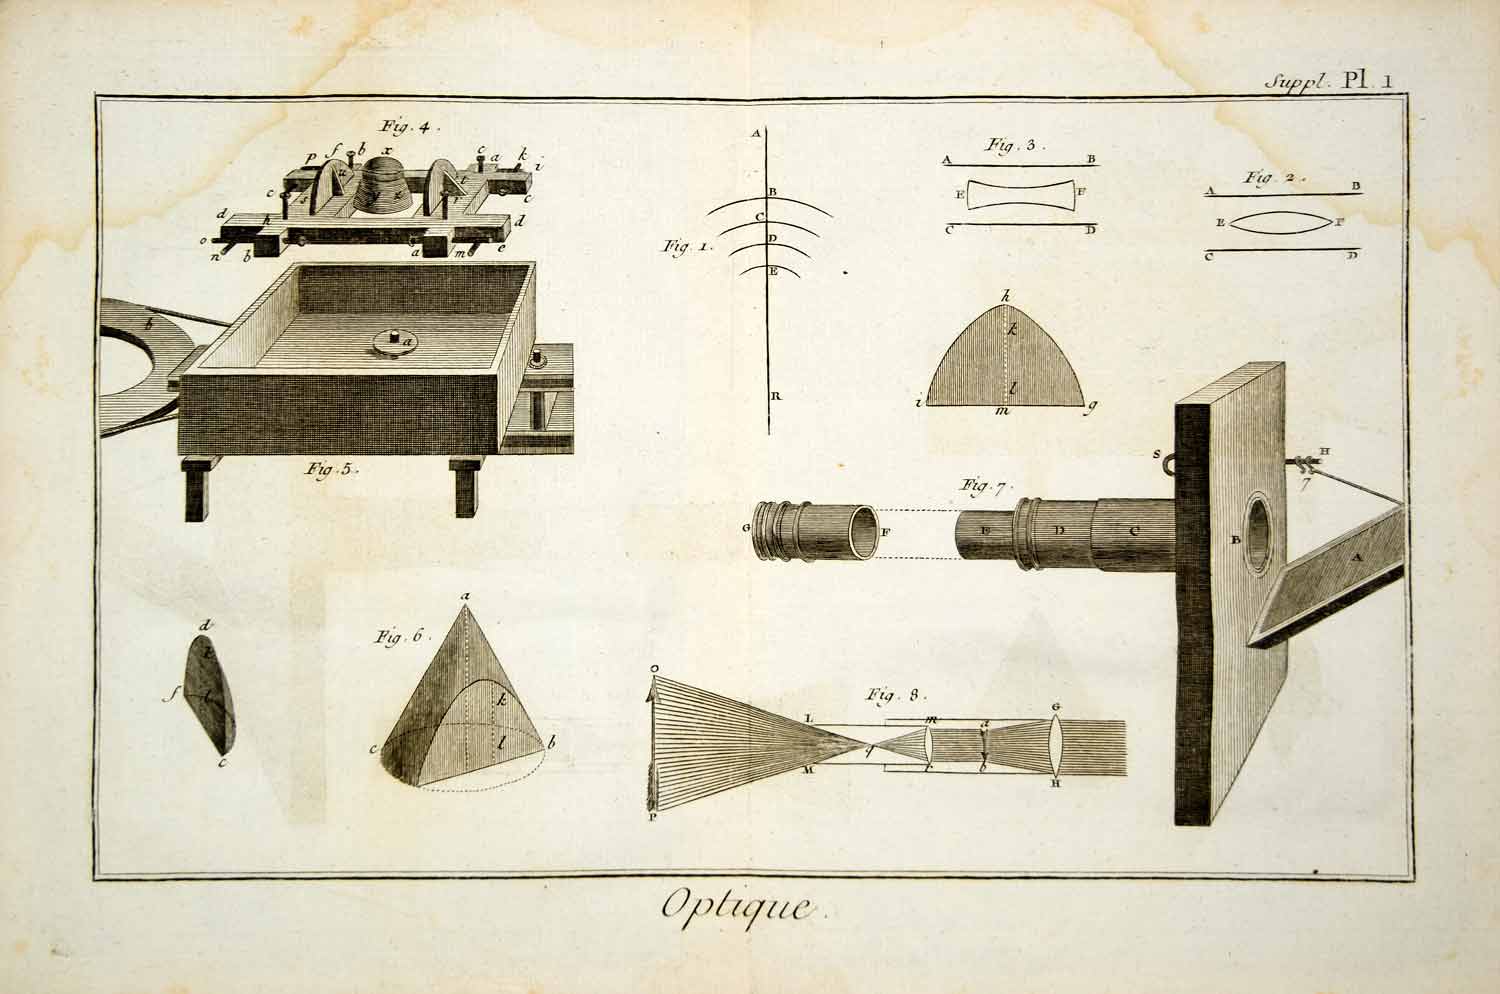 1779 Copper Engraving Optical Devices Solar Microscope Lens Diderot Antique DDR3